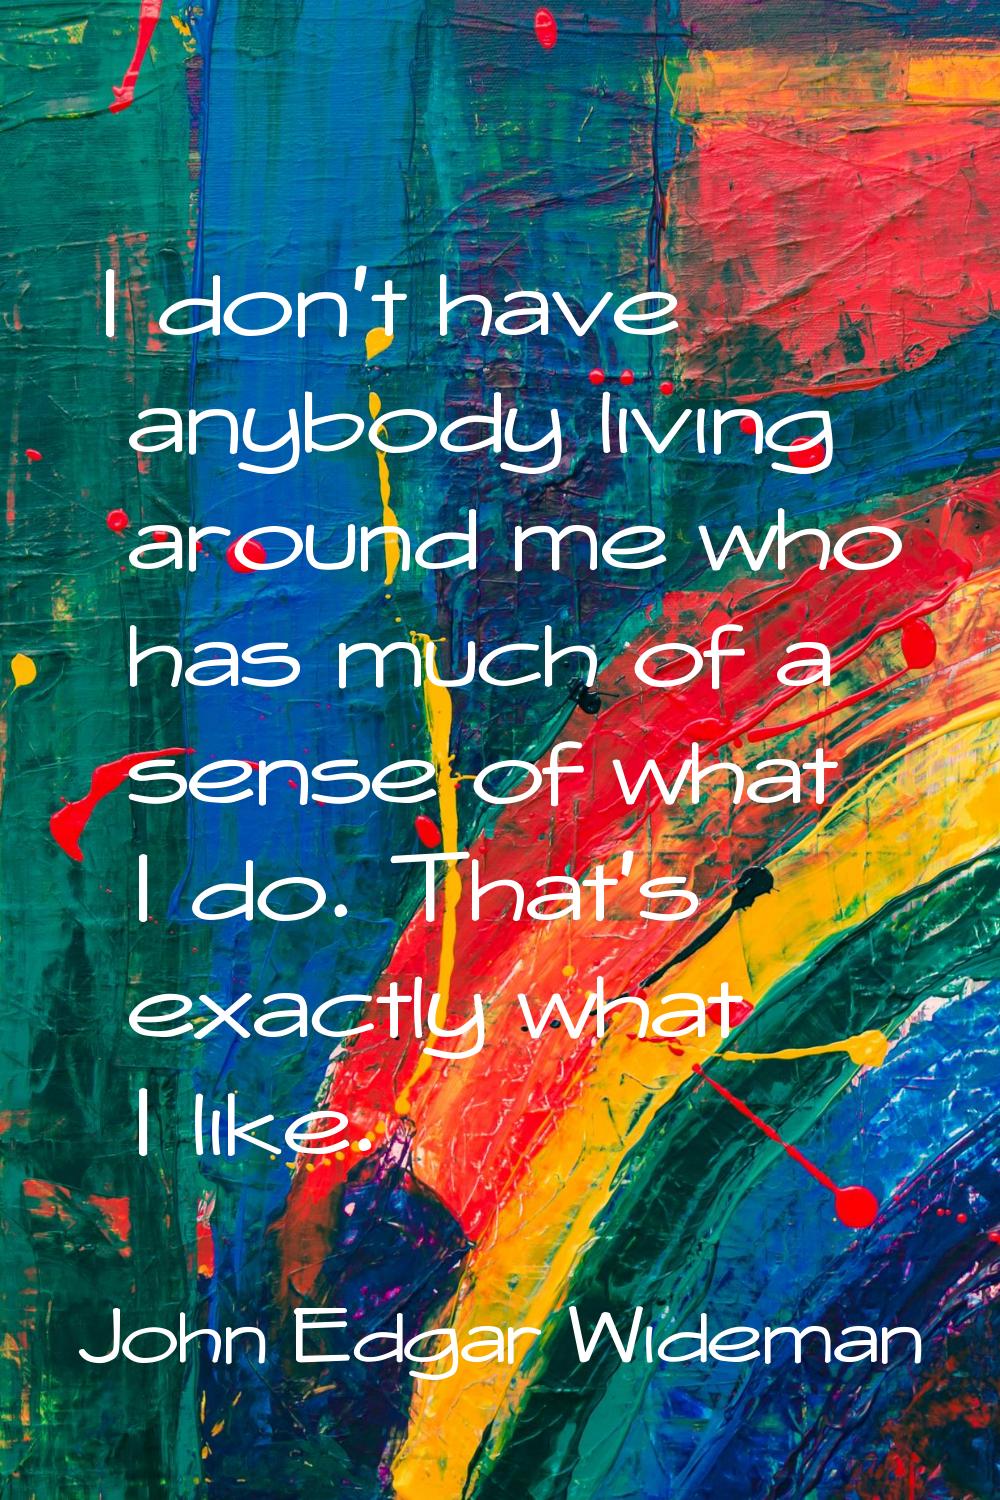 I don't have anybody living around me who has much of a sense of what I do. That's exactly what I l